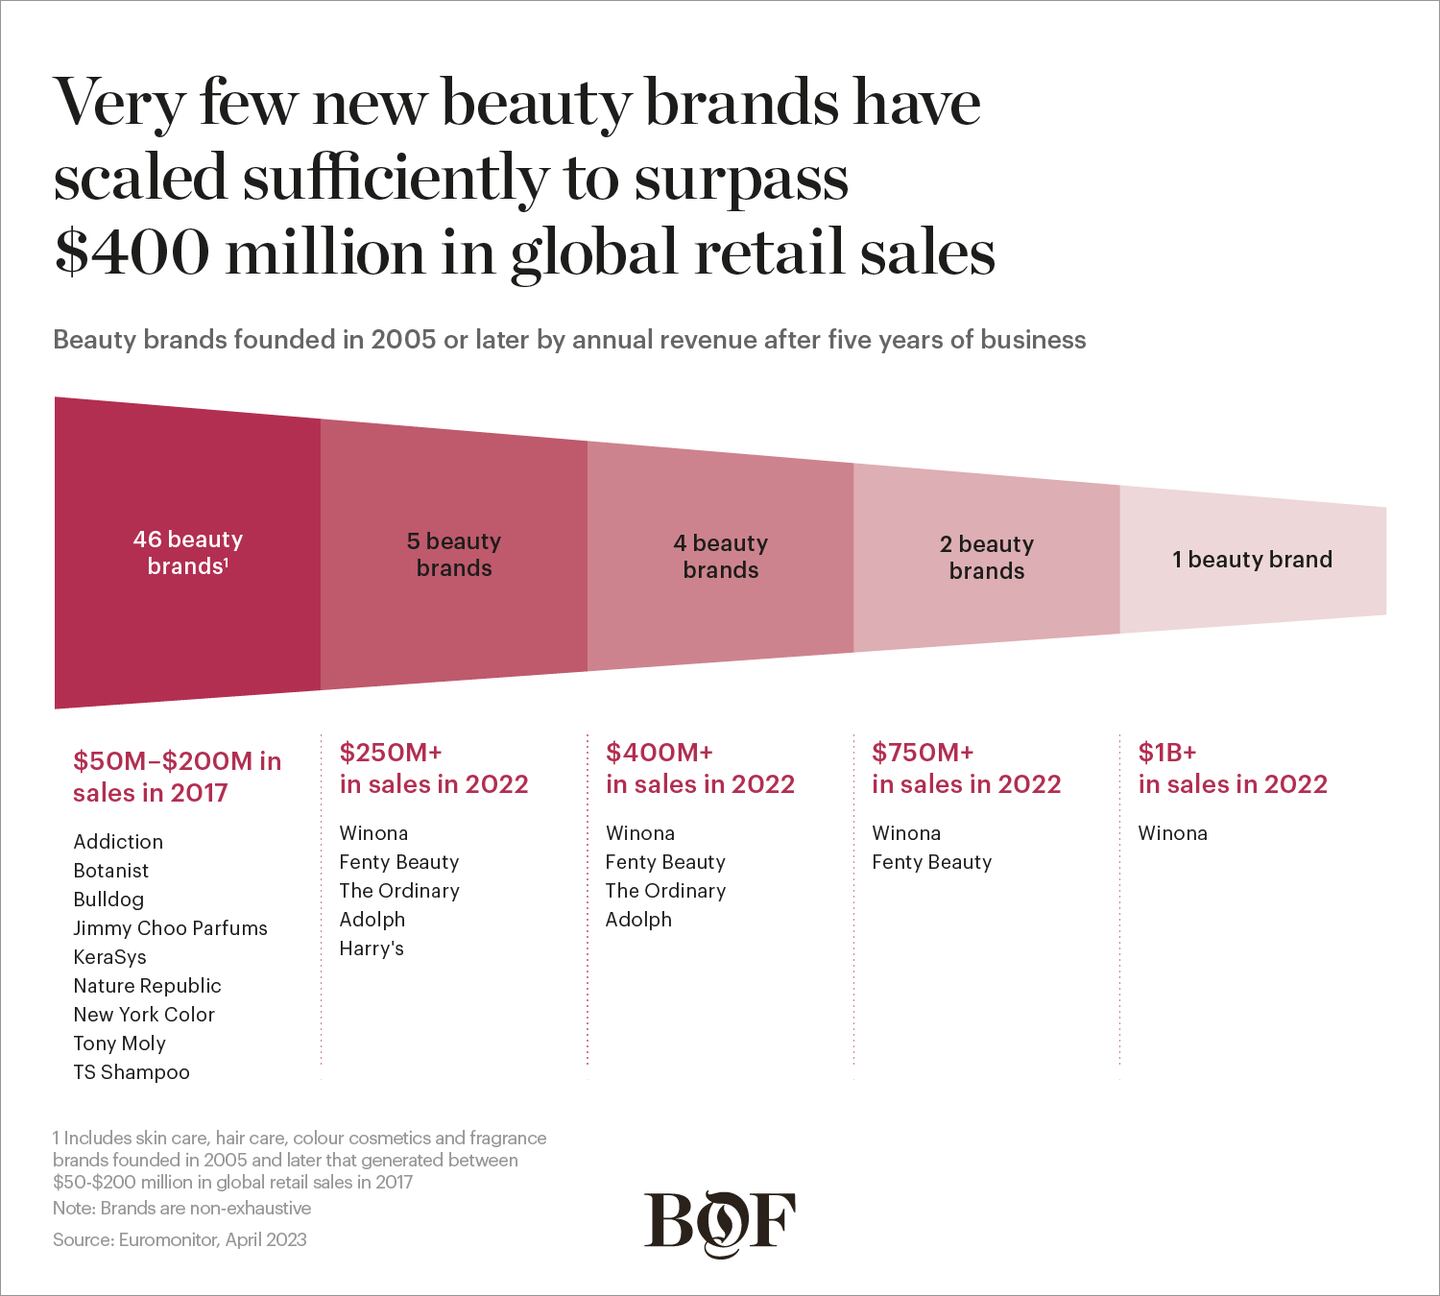 Very few new beauty brands have scaled sufficiently to surpass $400 million in global retail sales